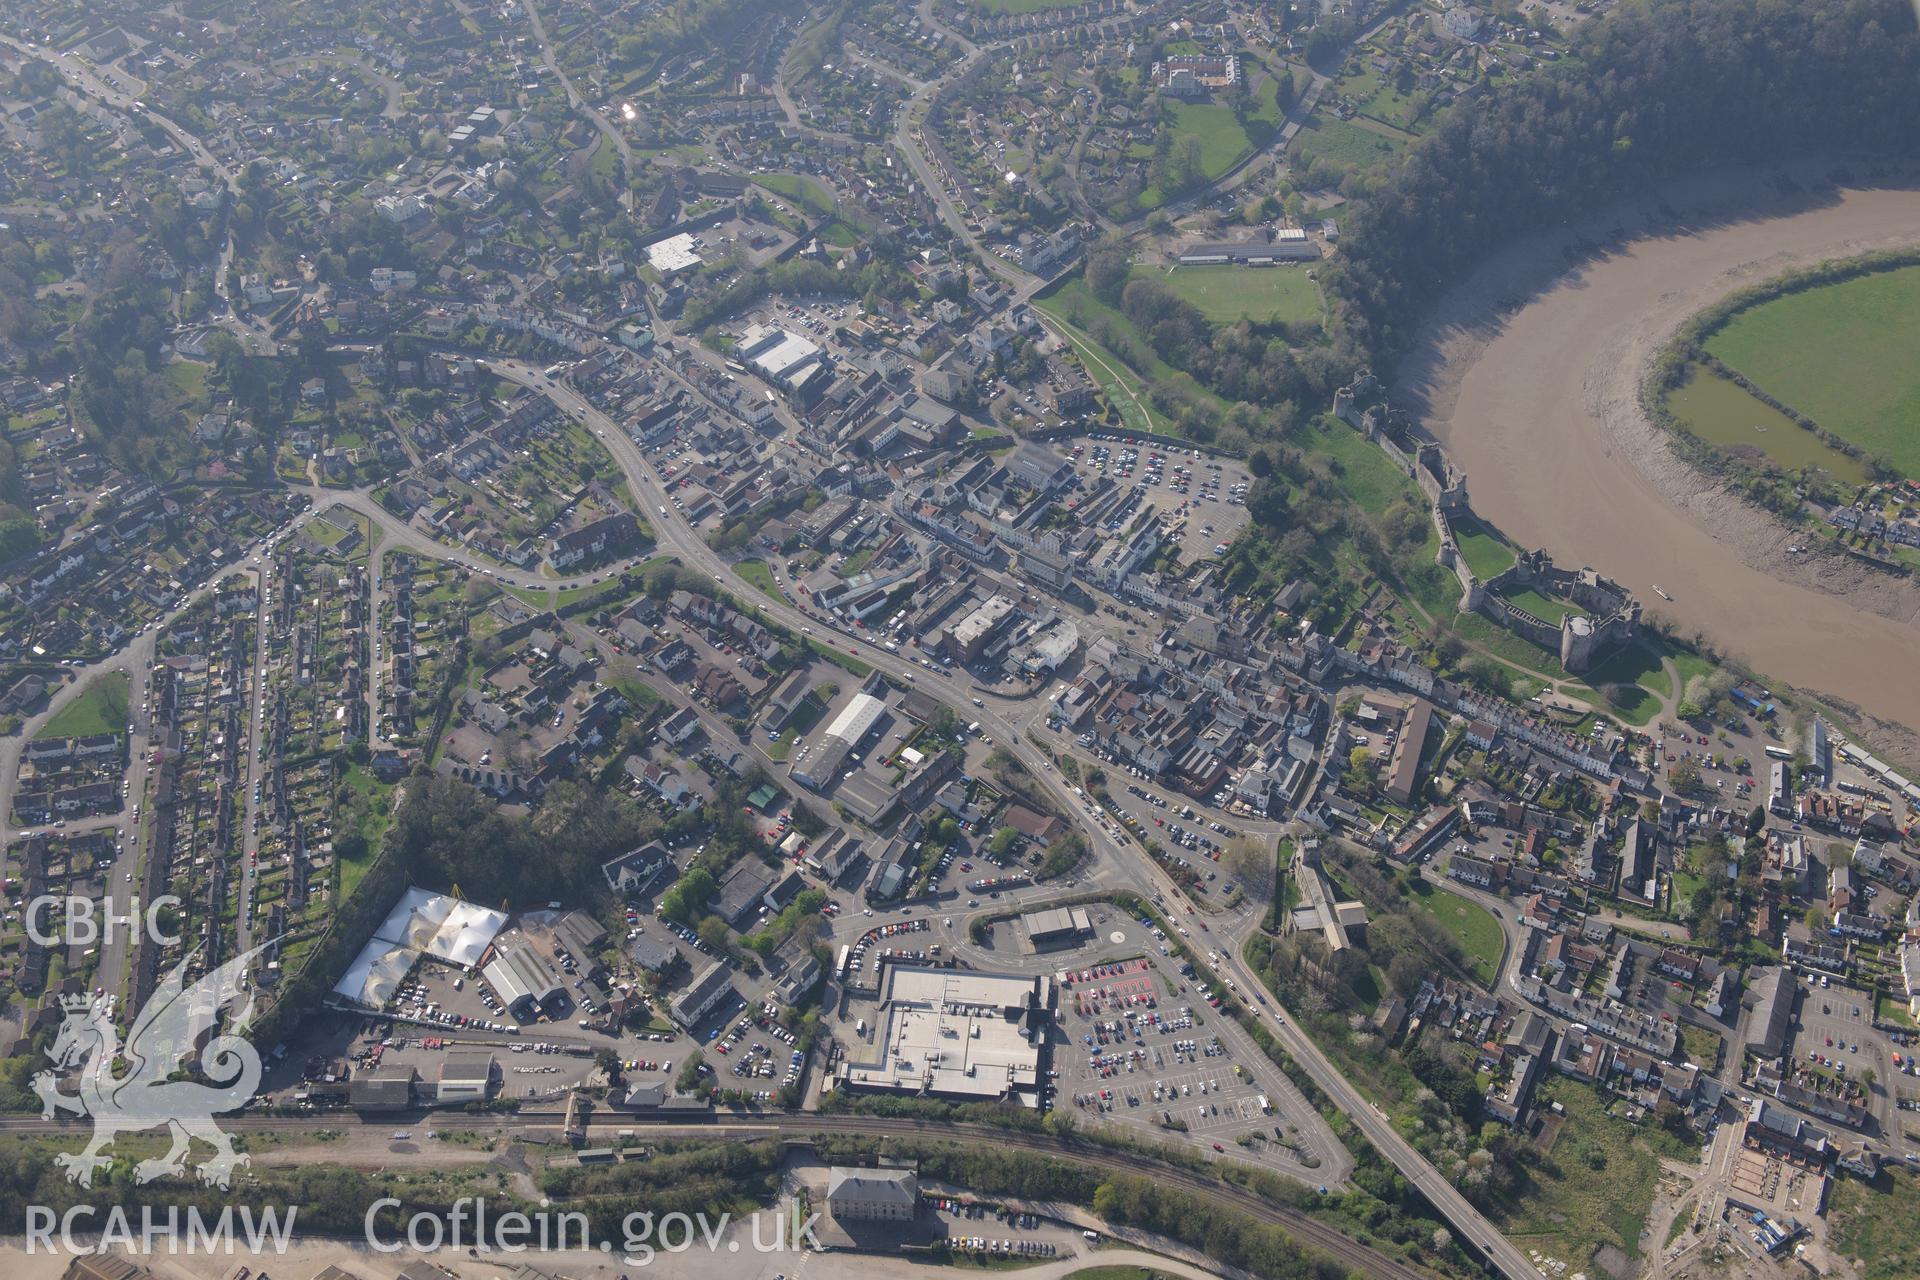 Chepstow including views of the Castle, St. Mary's Church, the Town Wall, Port Wall School, Sharpe's Steam Flour Mill and the Mount House. Oblique aerial photograph taken during the Royal Commission's programme of archaeological aerial reconnaissance by Toby Driver on 21st April 2015.